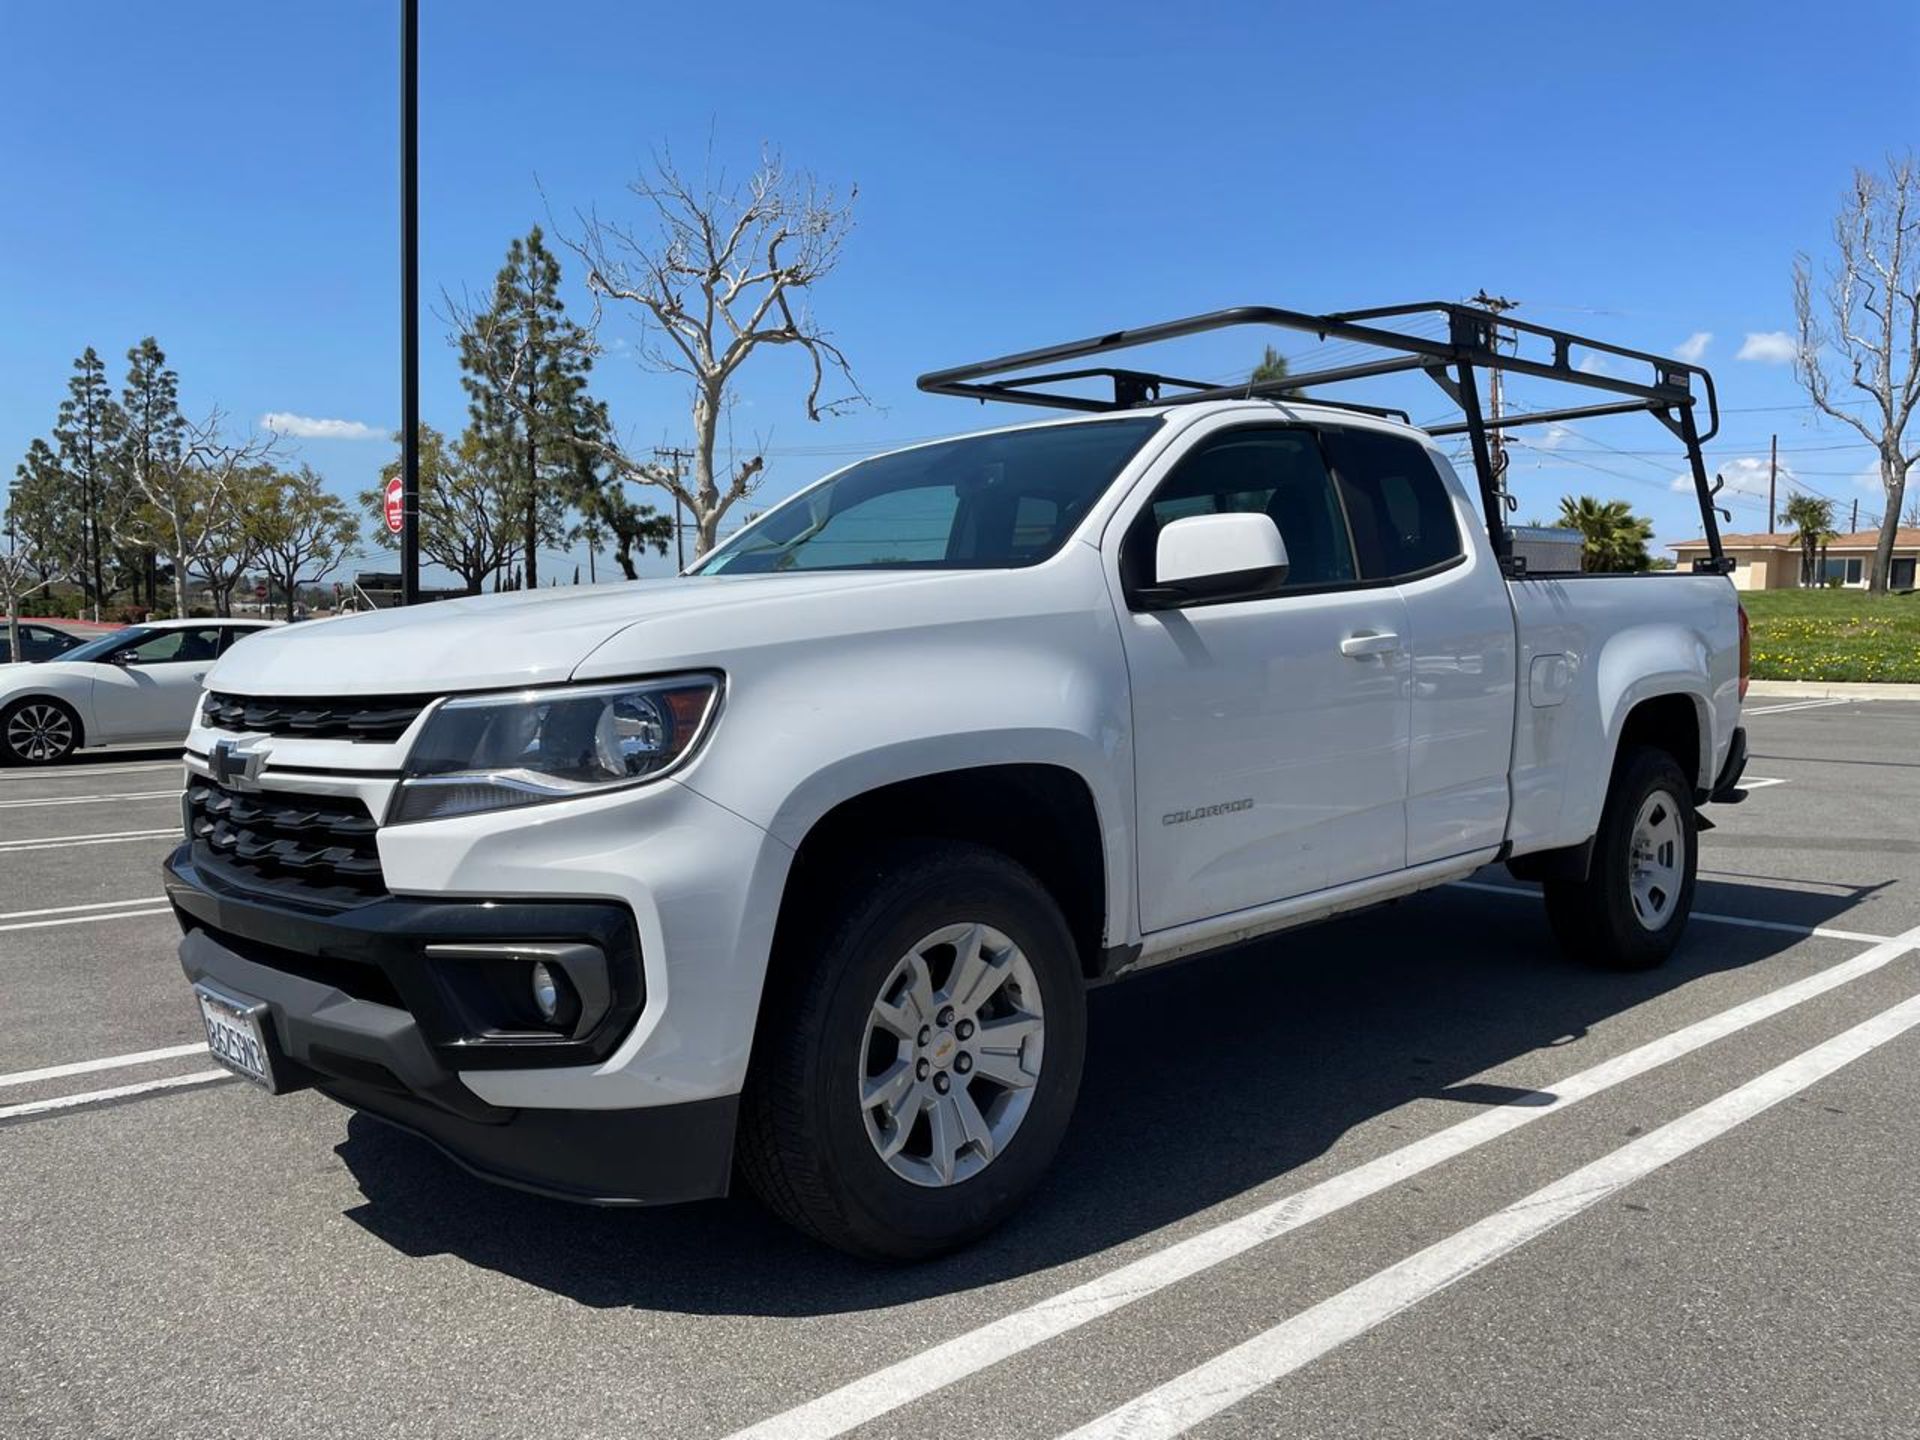 2022 Chevrolet Colorado LT Extended Cab 4x2 Pickup Truck - Image 2 of 23